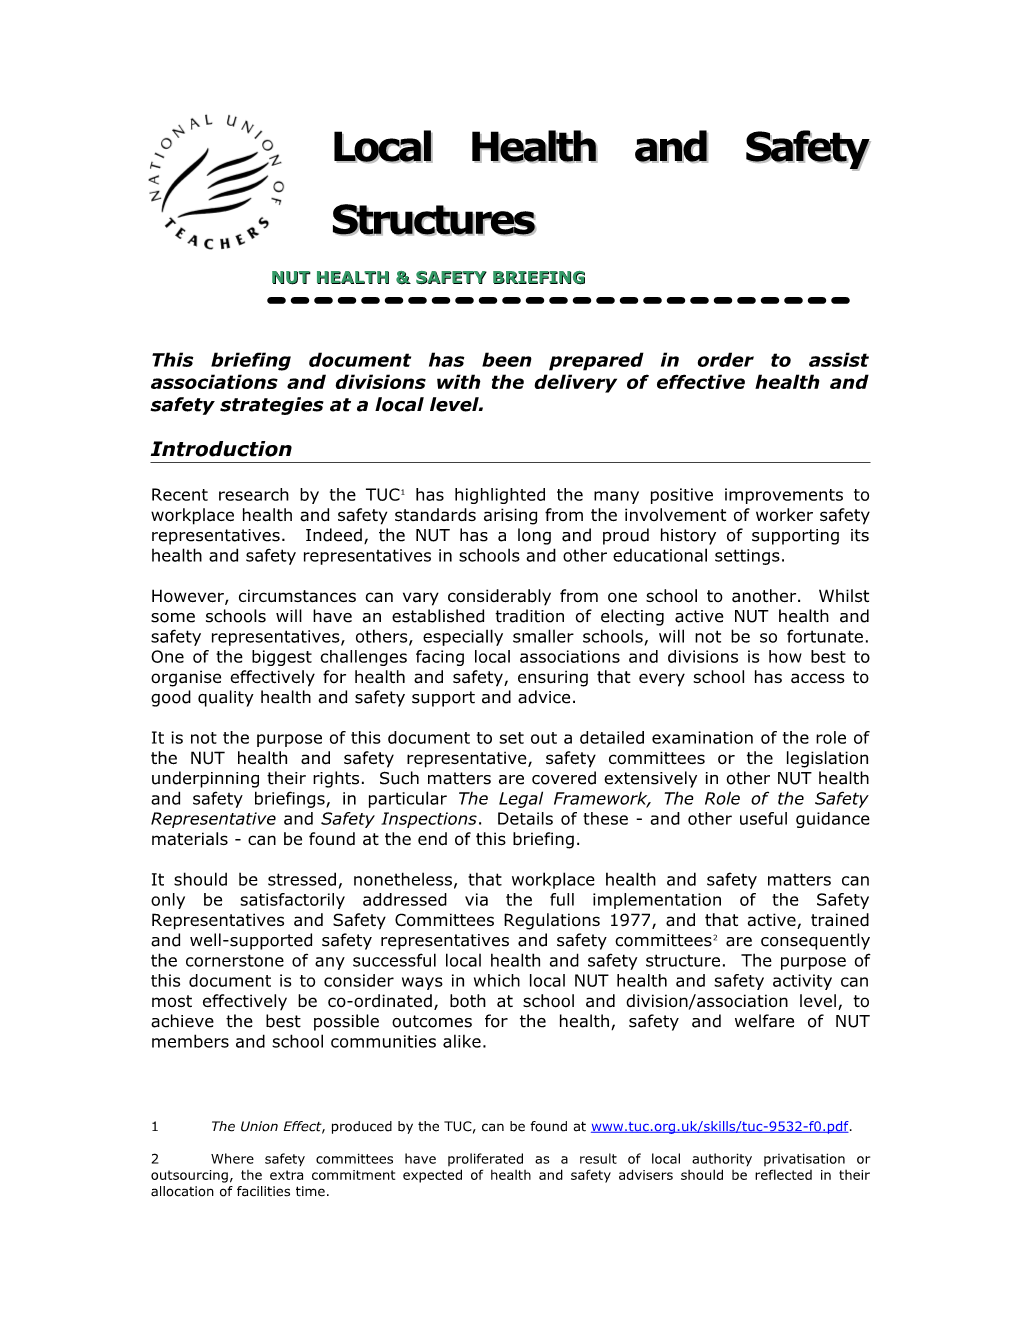 Local Health & Safety Structures